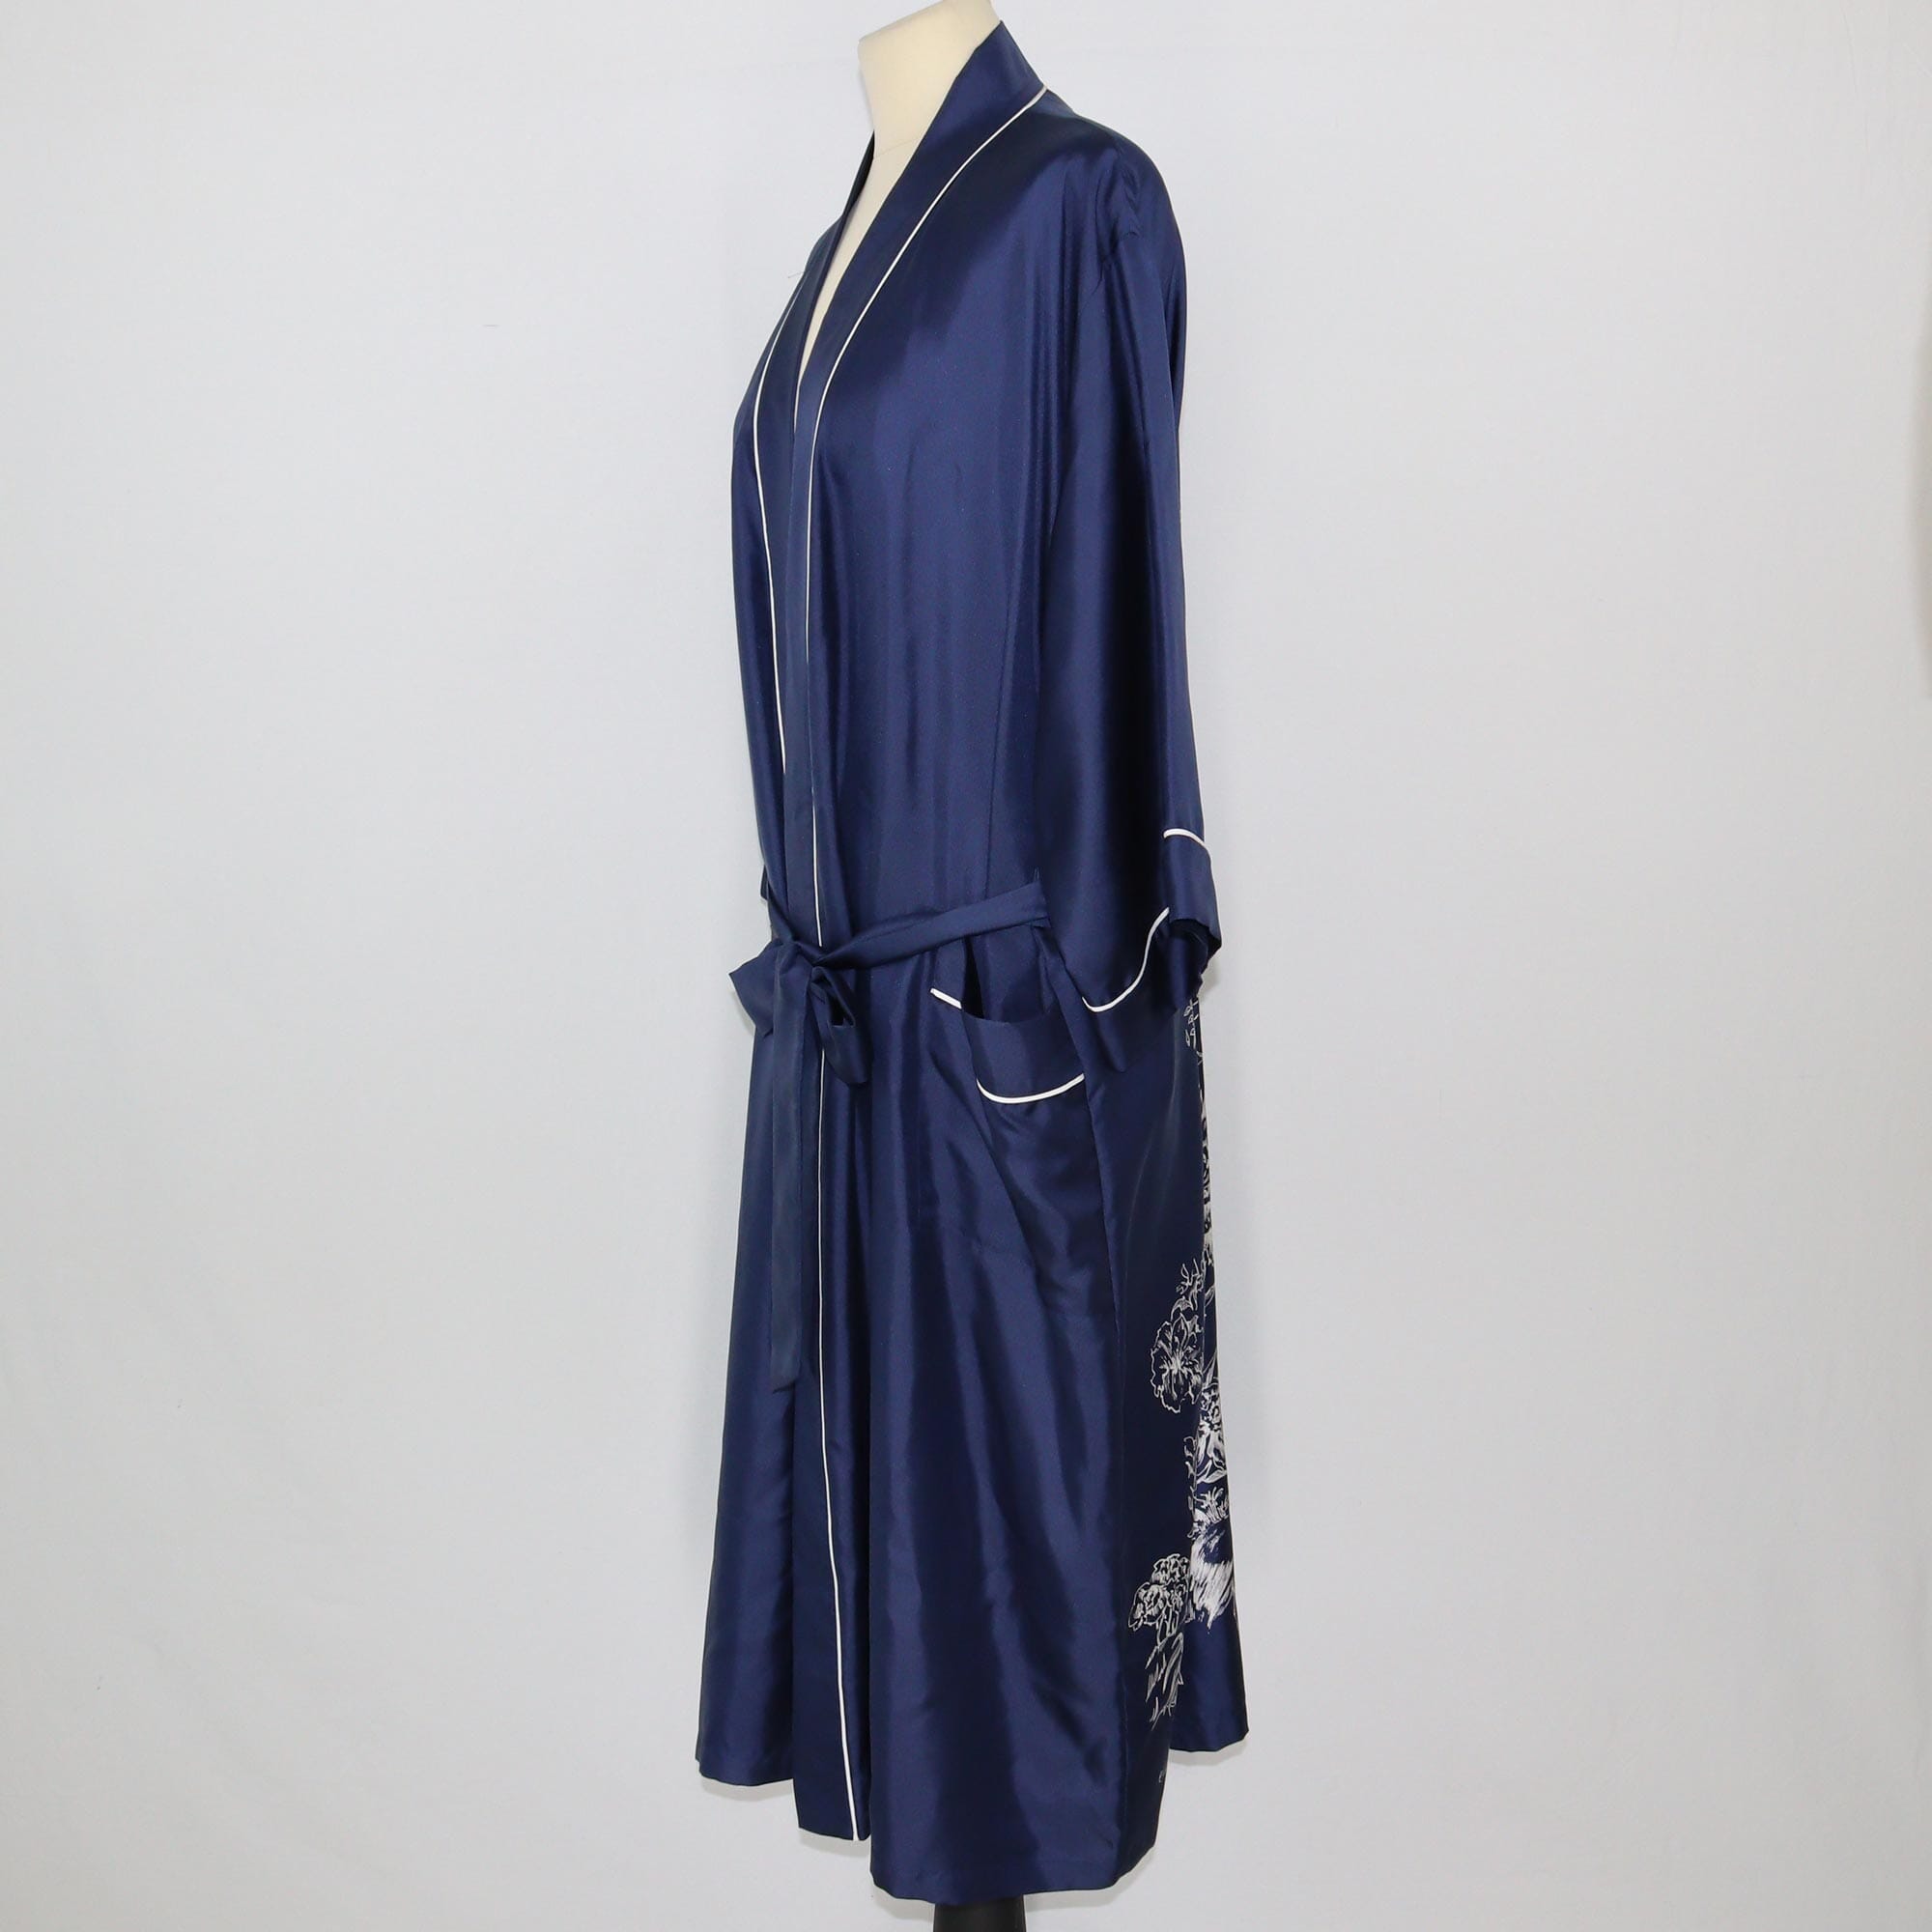 Dior Blue Printed Belted Robe Clothing Dior 